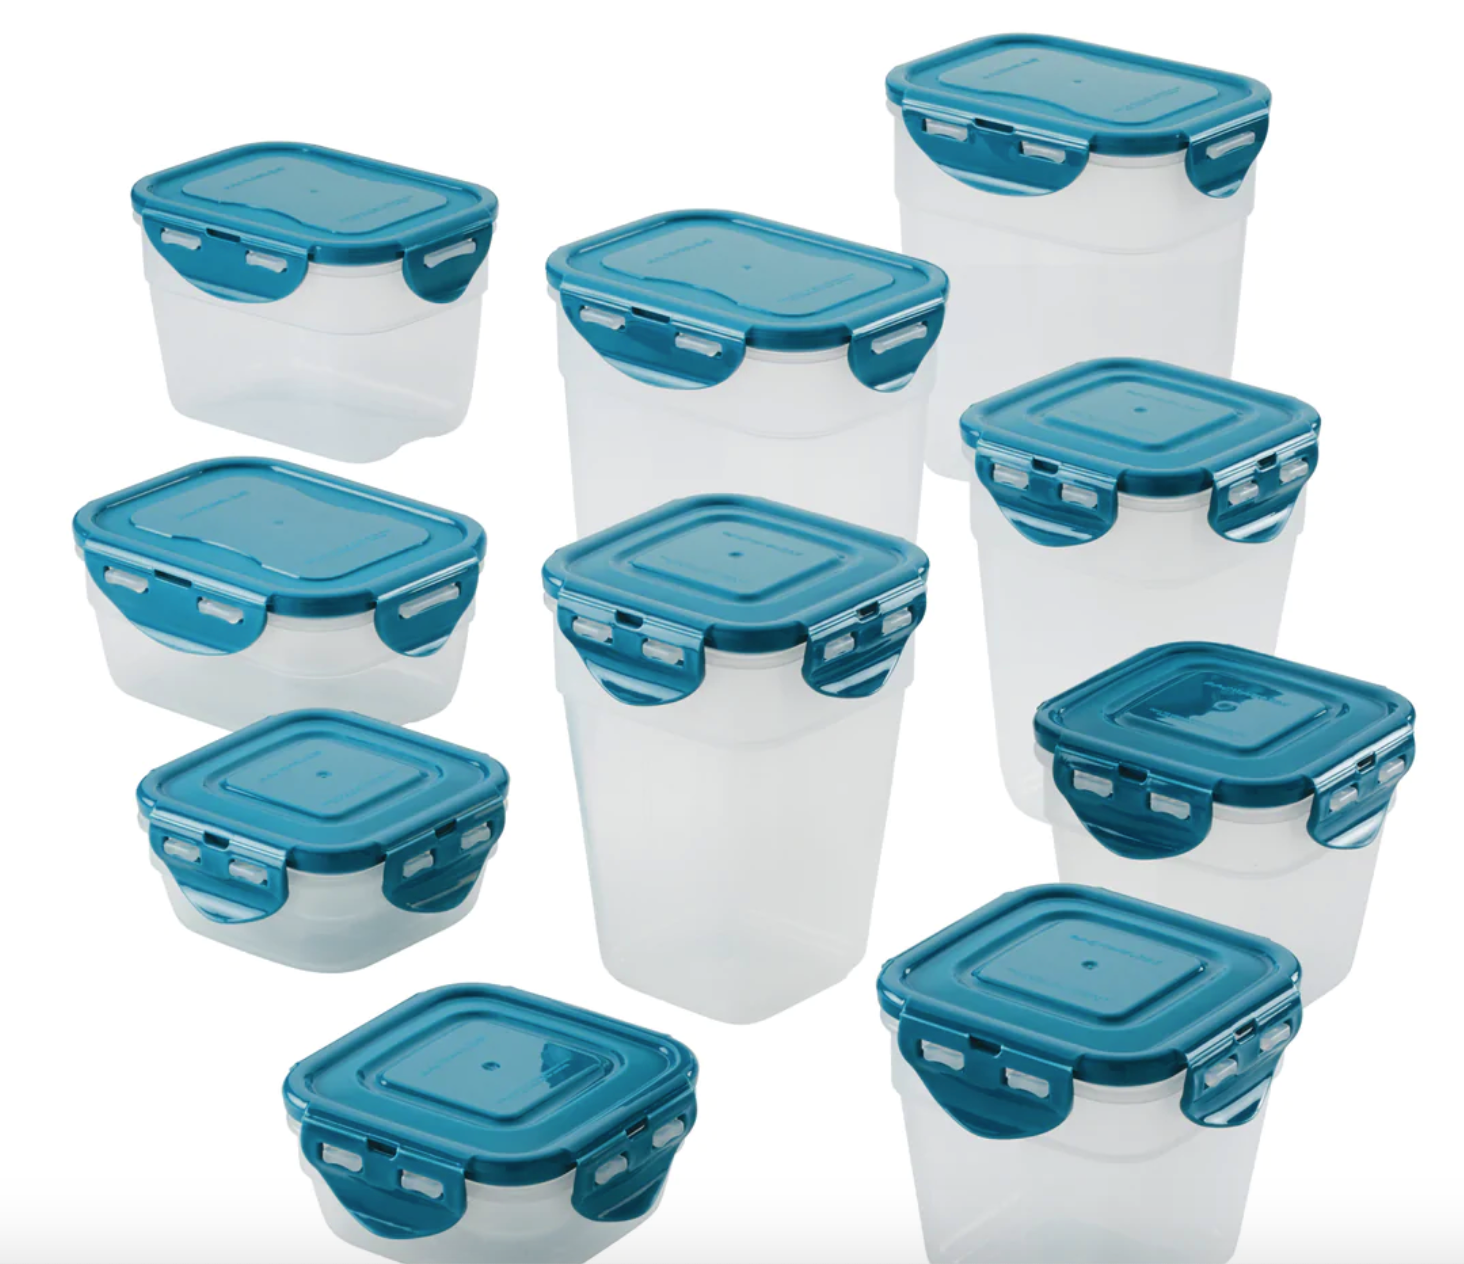 rachael ray 20 piece food container set